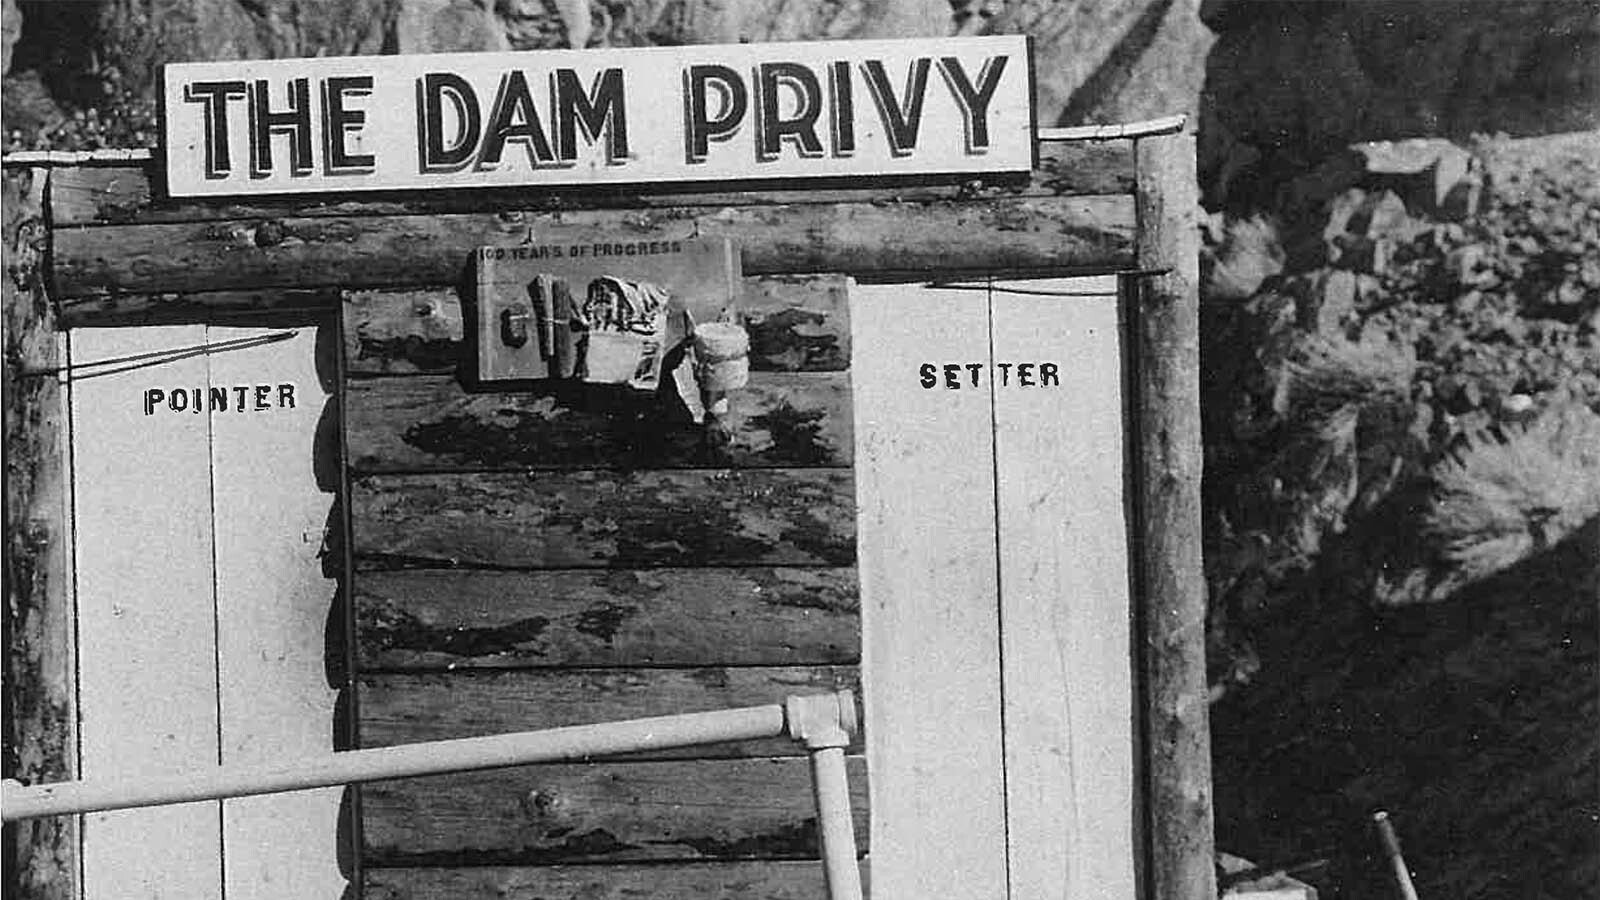 The Dam Bar and Privy were famous — and infamous — Wyoming landmarks.